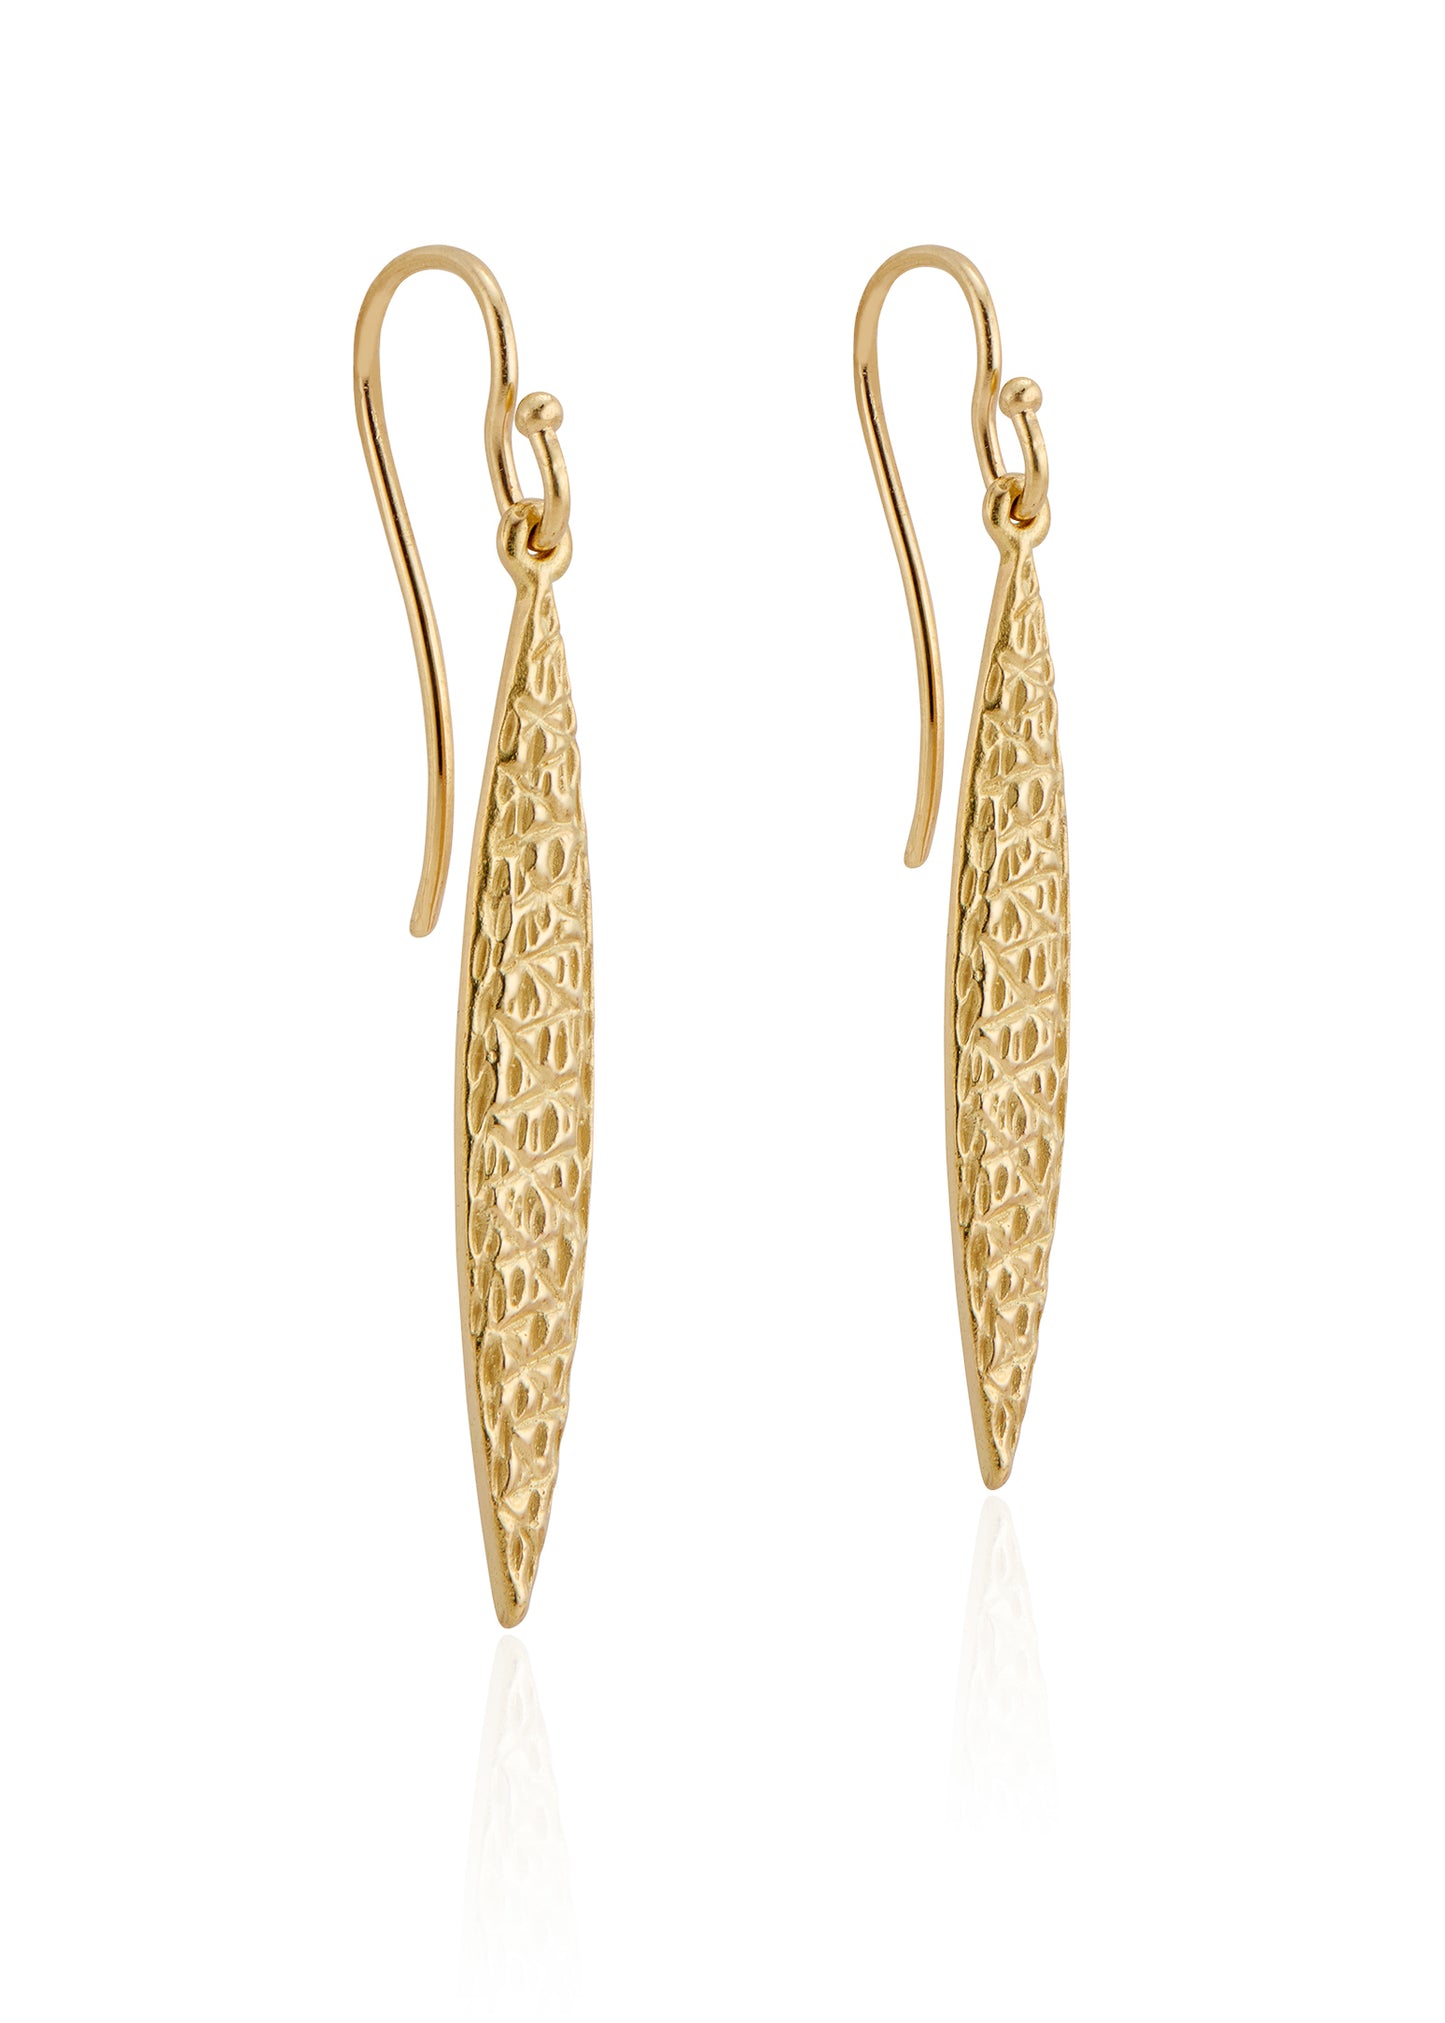 Inspired by the sacred tree of protection which shares its name, the Linden earring slopes gracefully into an elongated point, its delicate details mirroring the weathered bark of the tree that offers shelter to those who seek it. 